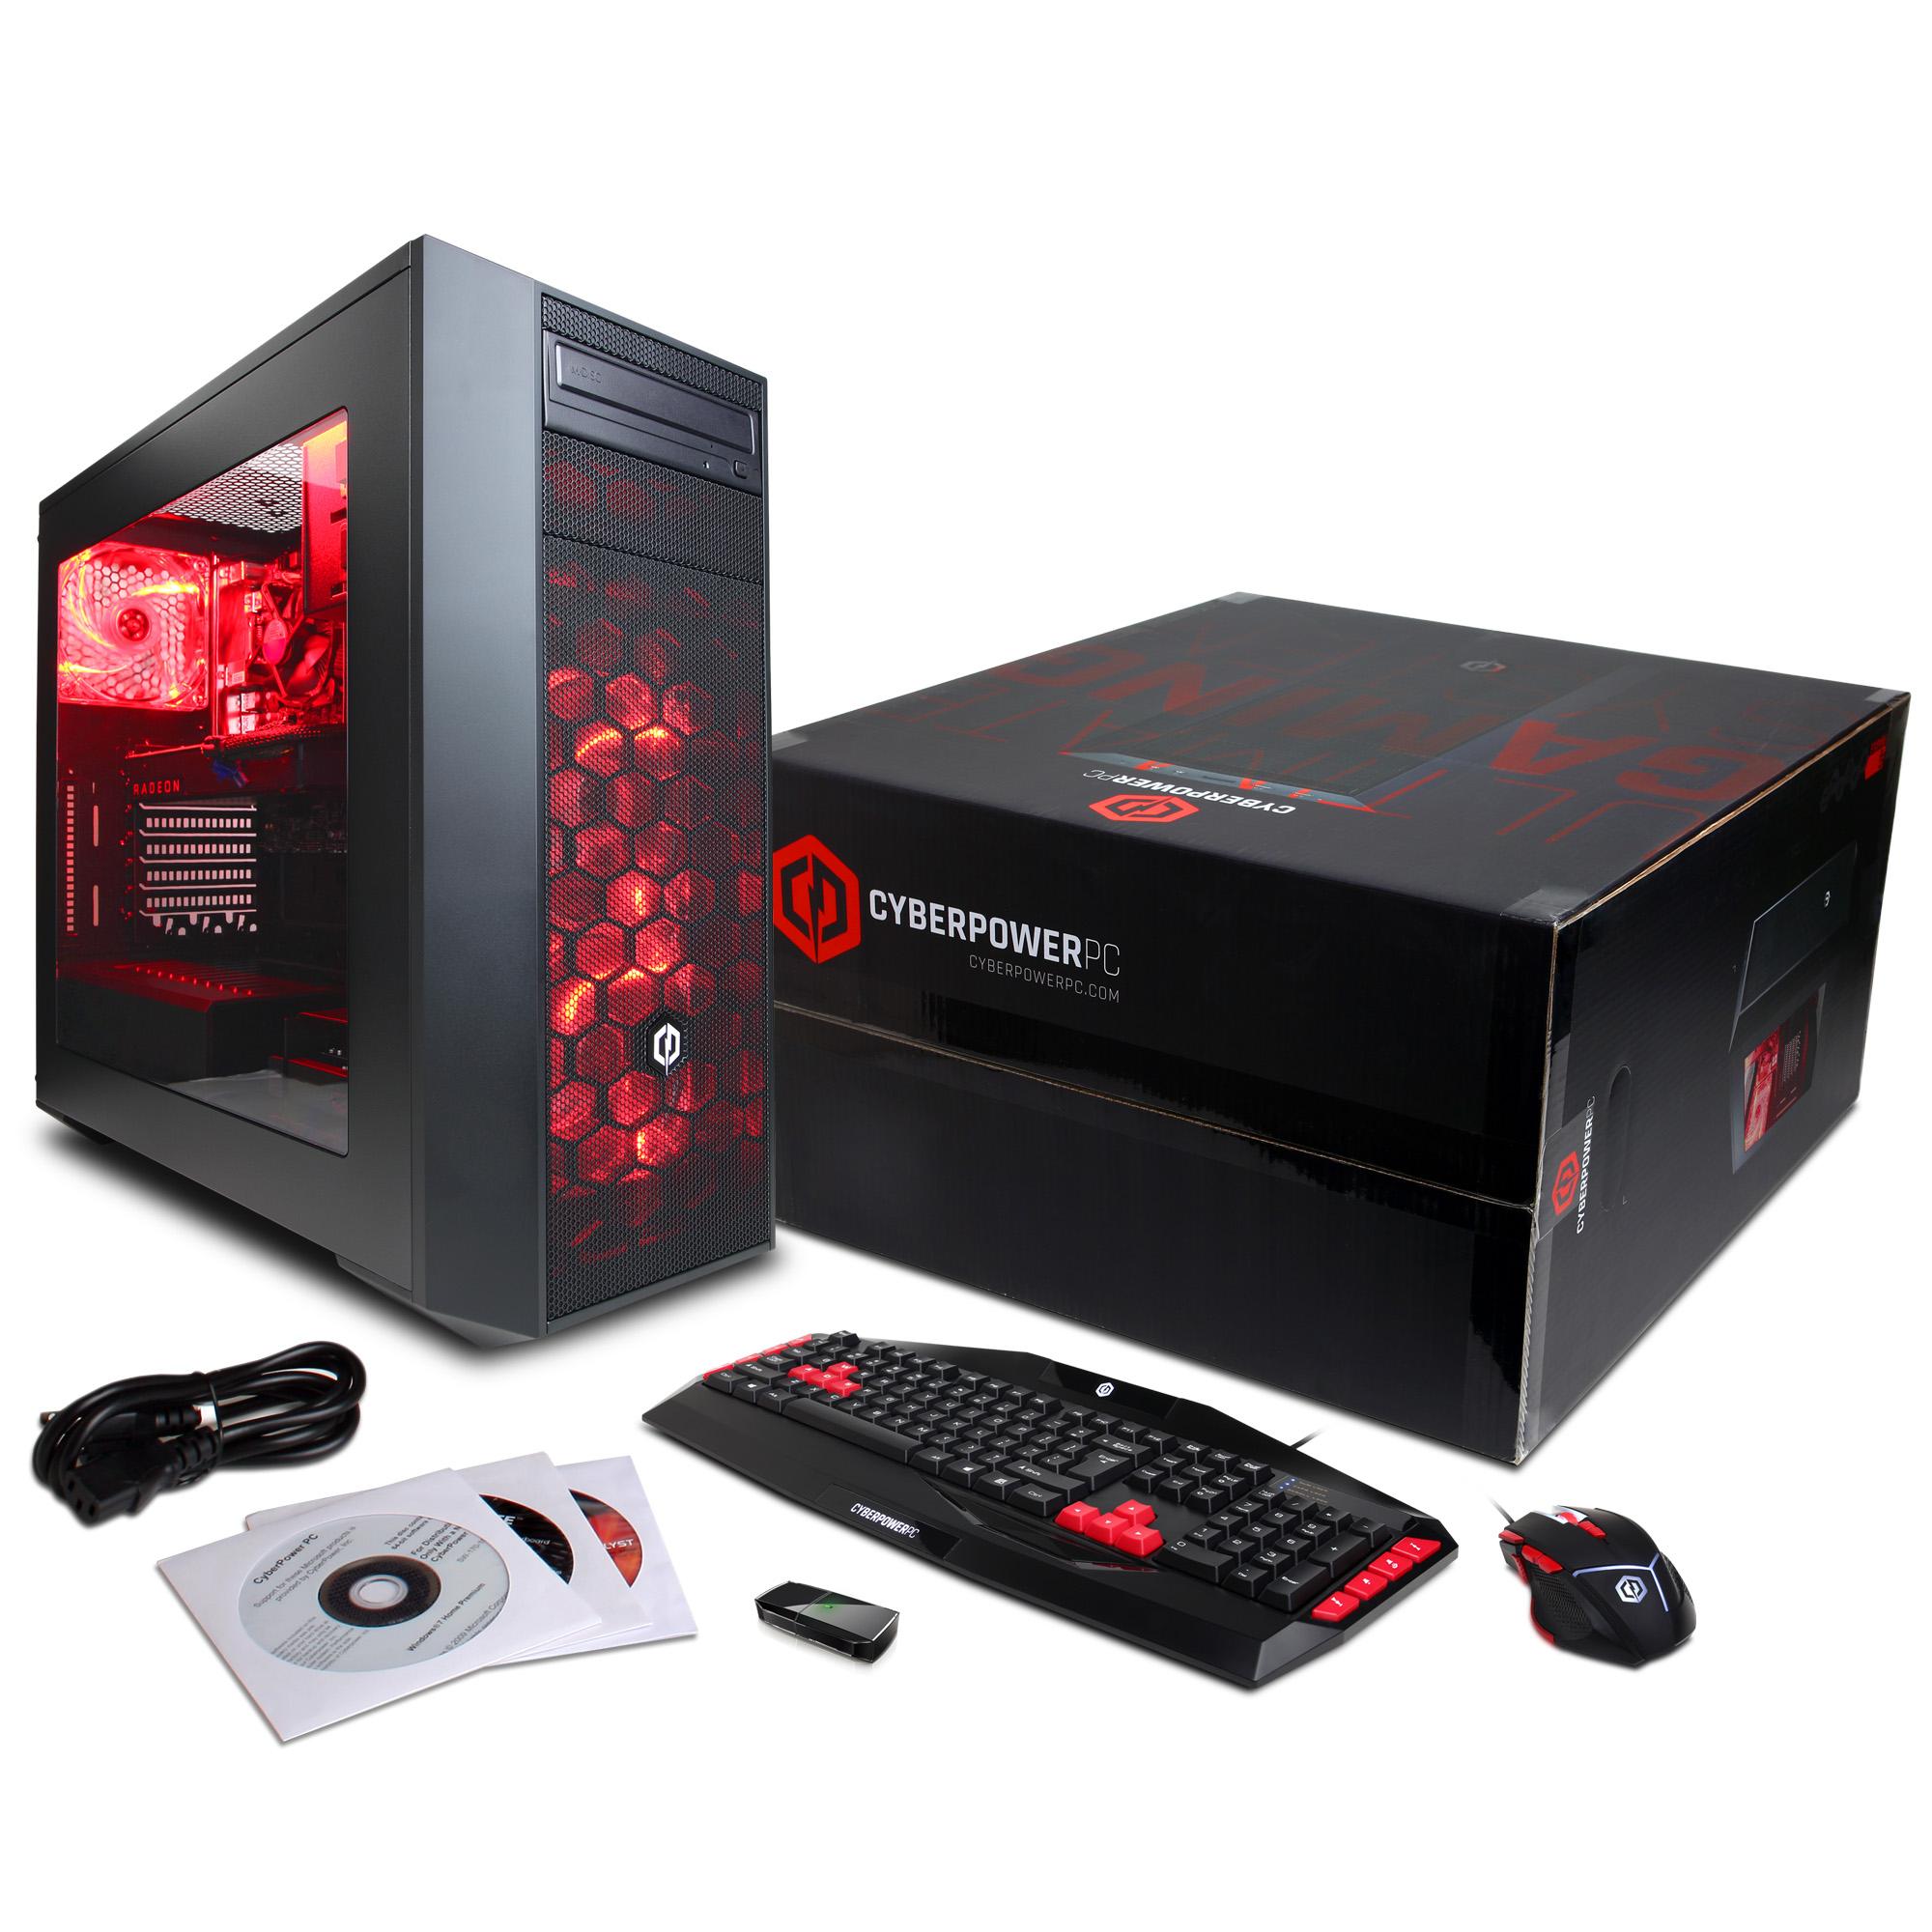 Cyberpowerpc Gamer Xtreme Vr Pc Review Gxivr8020a Page 6 Of 7 Legit Reviewspower Consumption And Cpu Temperatures